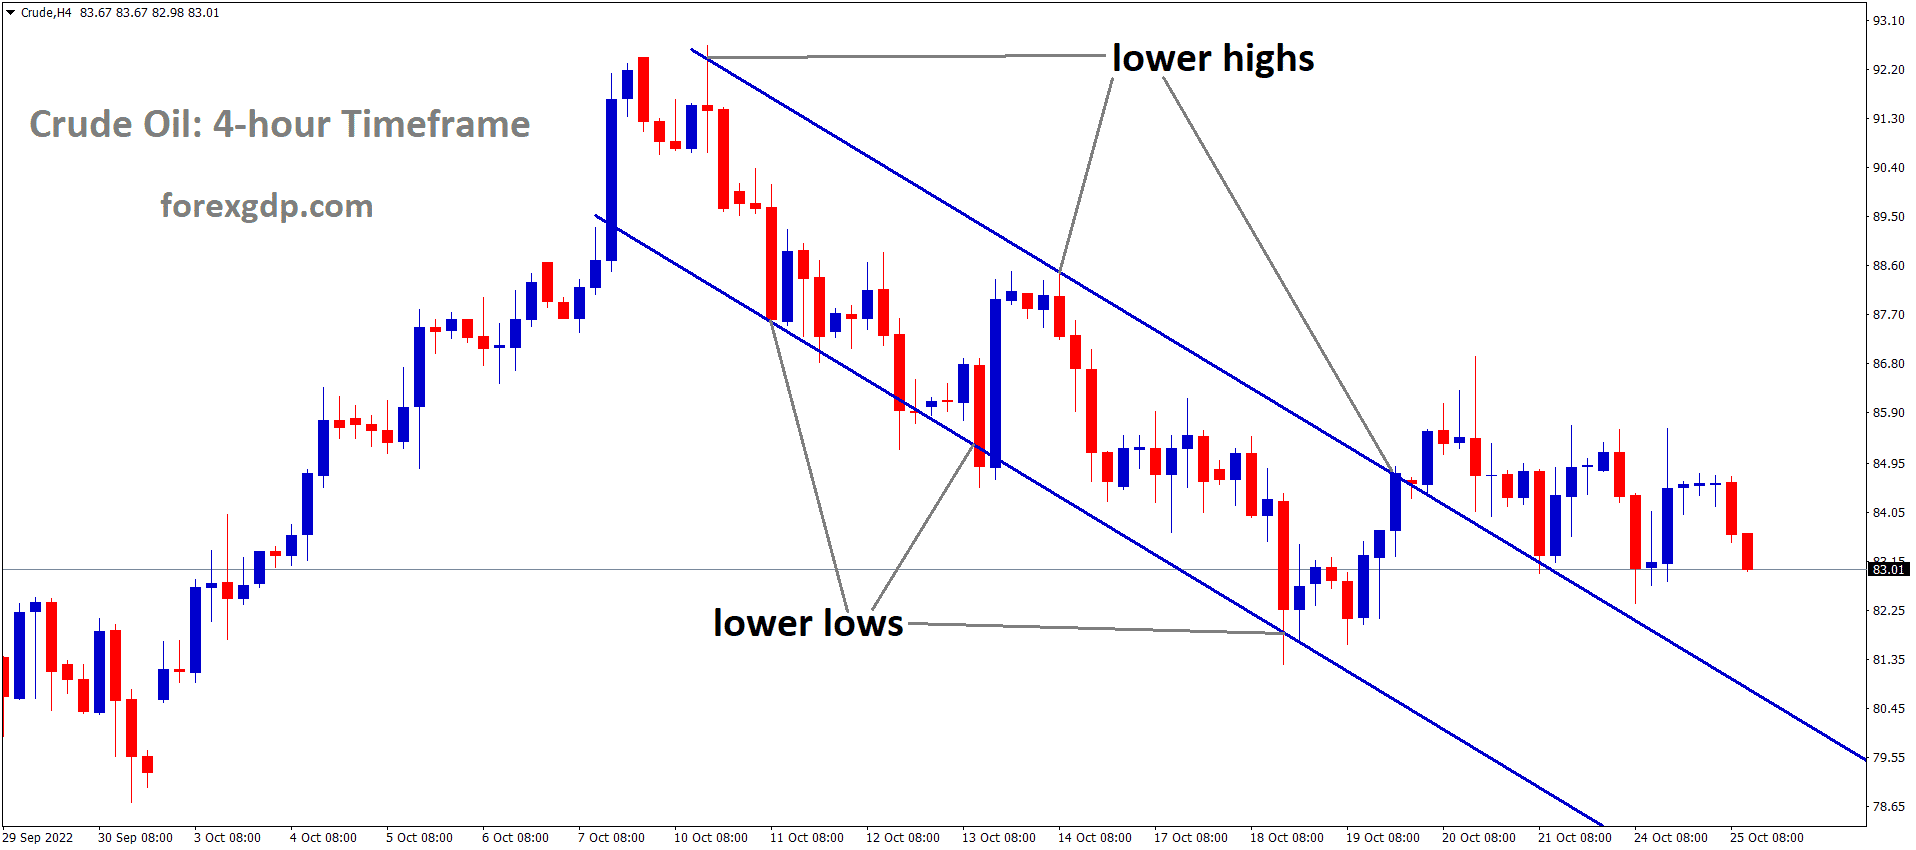 Crude Oil is moving in the Descending channel and the market has reached the lower high area of the channel 4